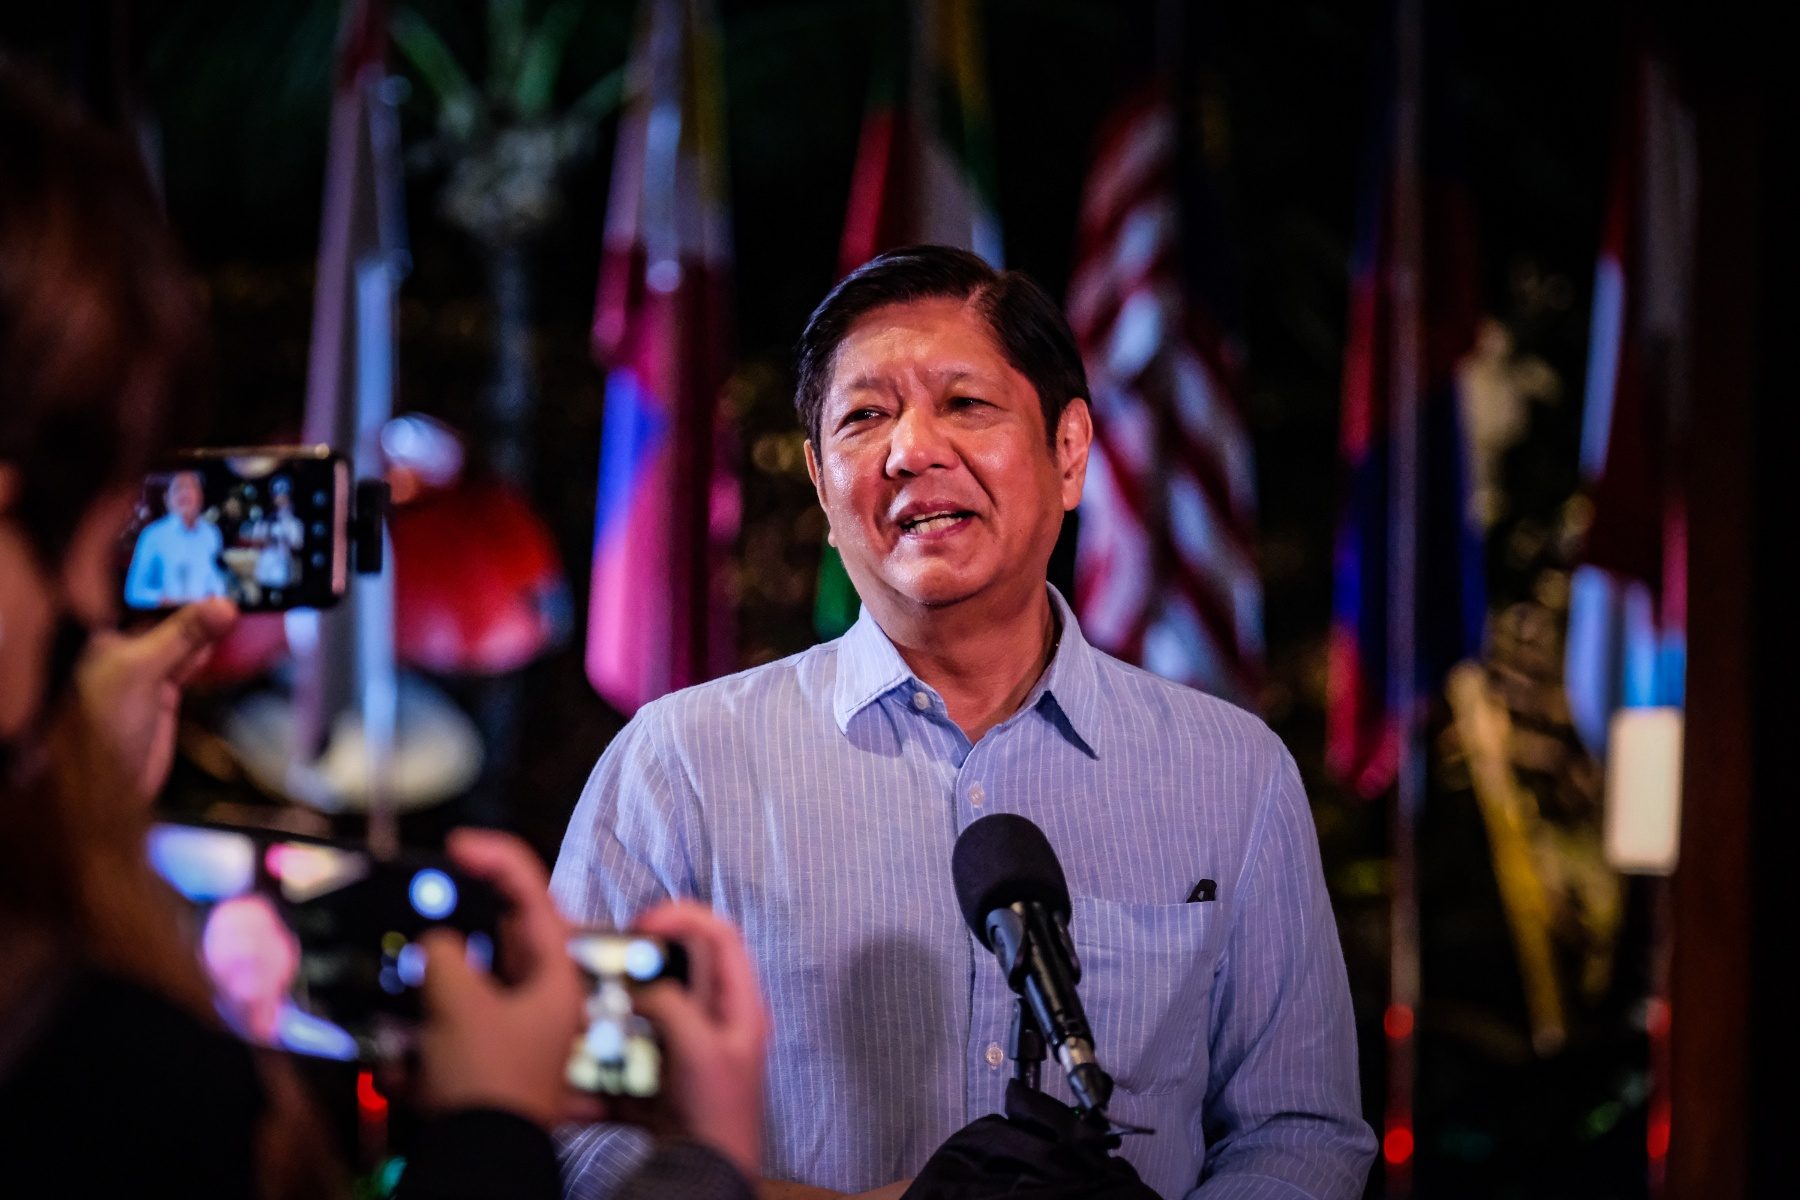 ‘Tapos na ’yung OJT’: Marcos teases Cabinet revamp after appointment ban ends